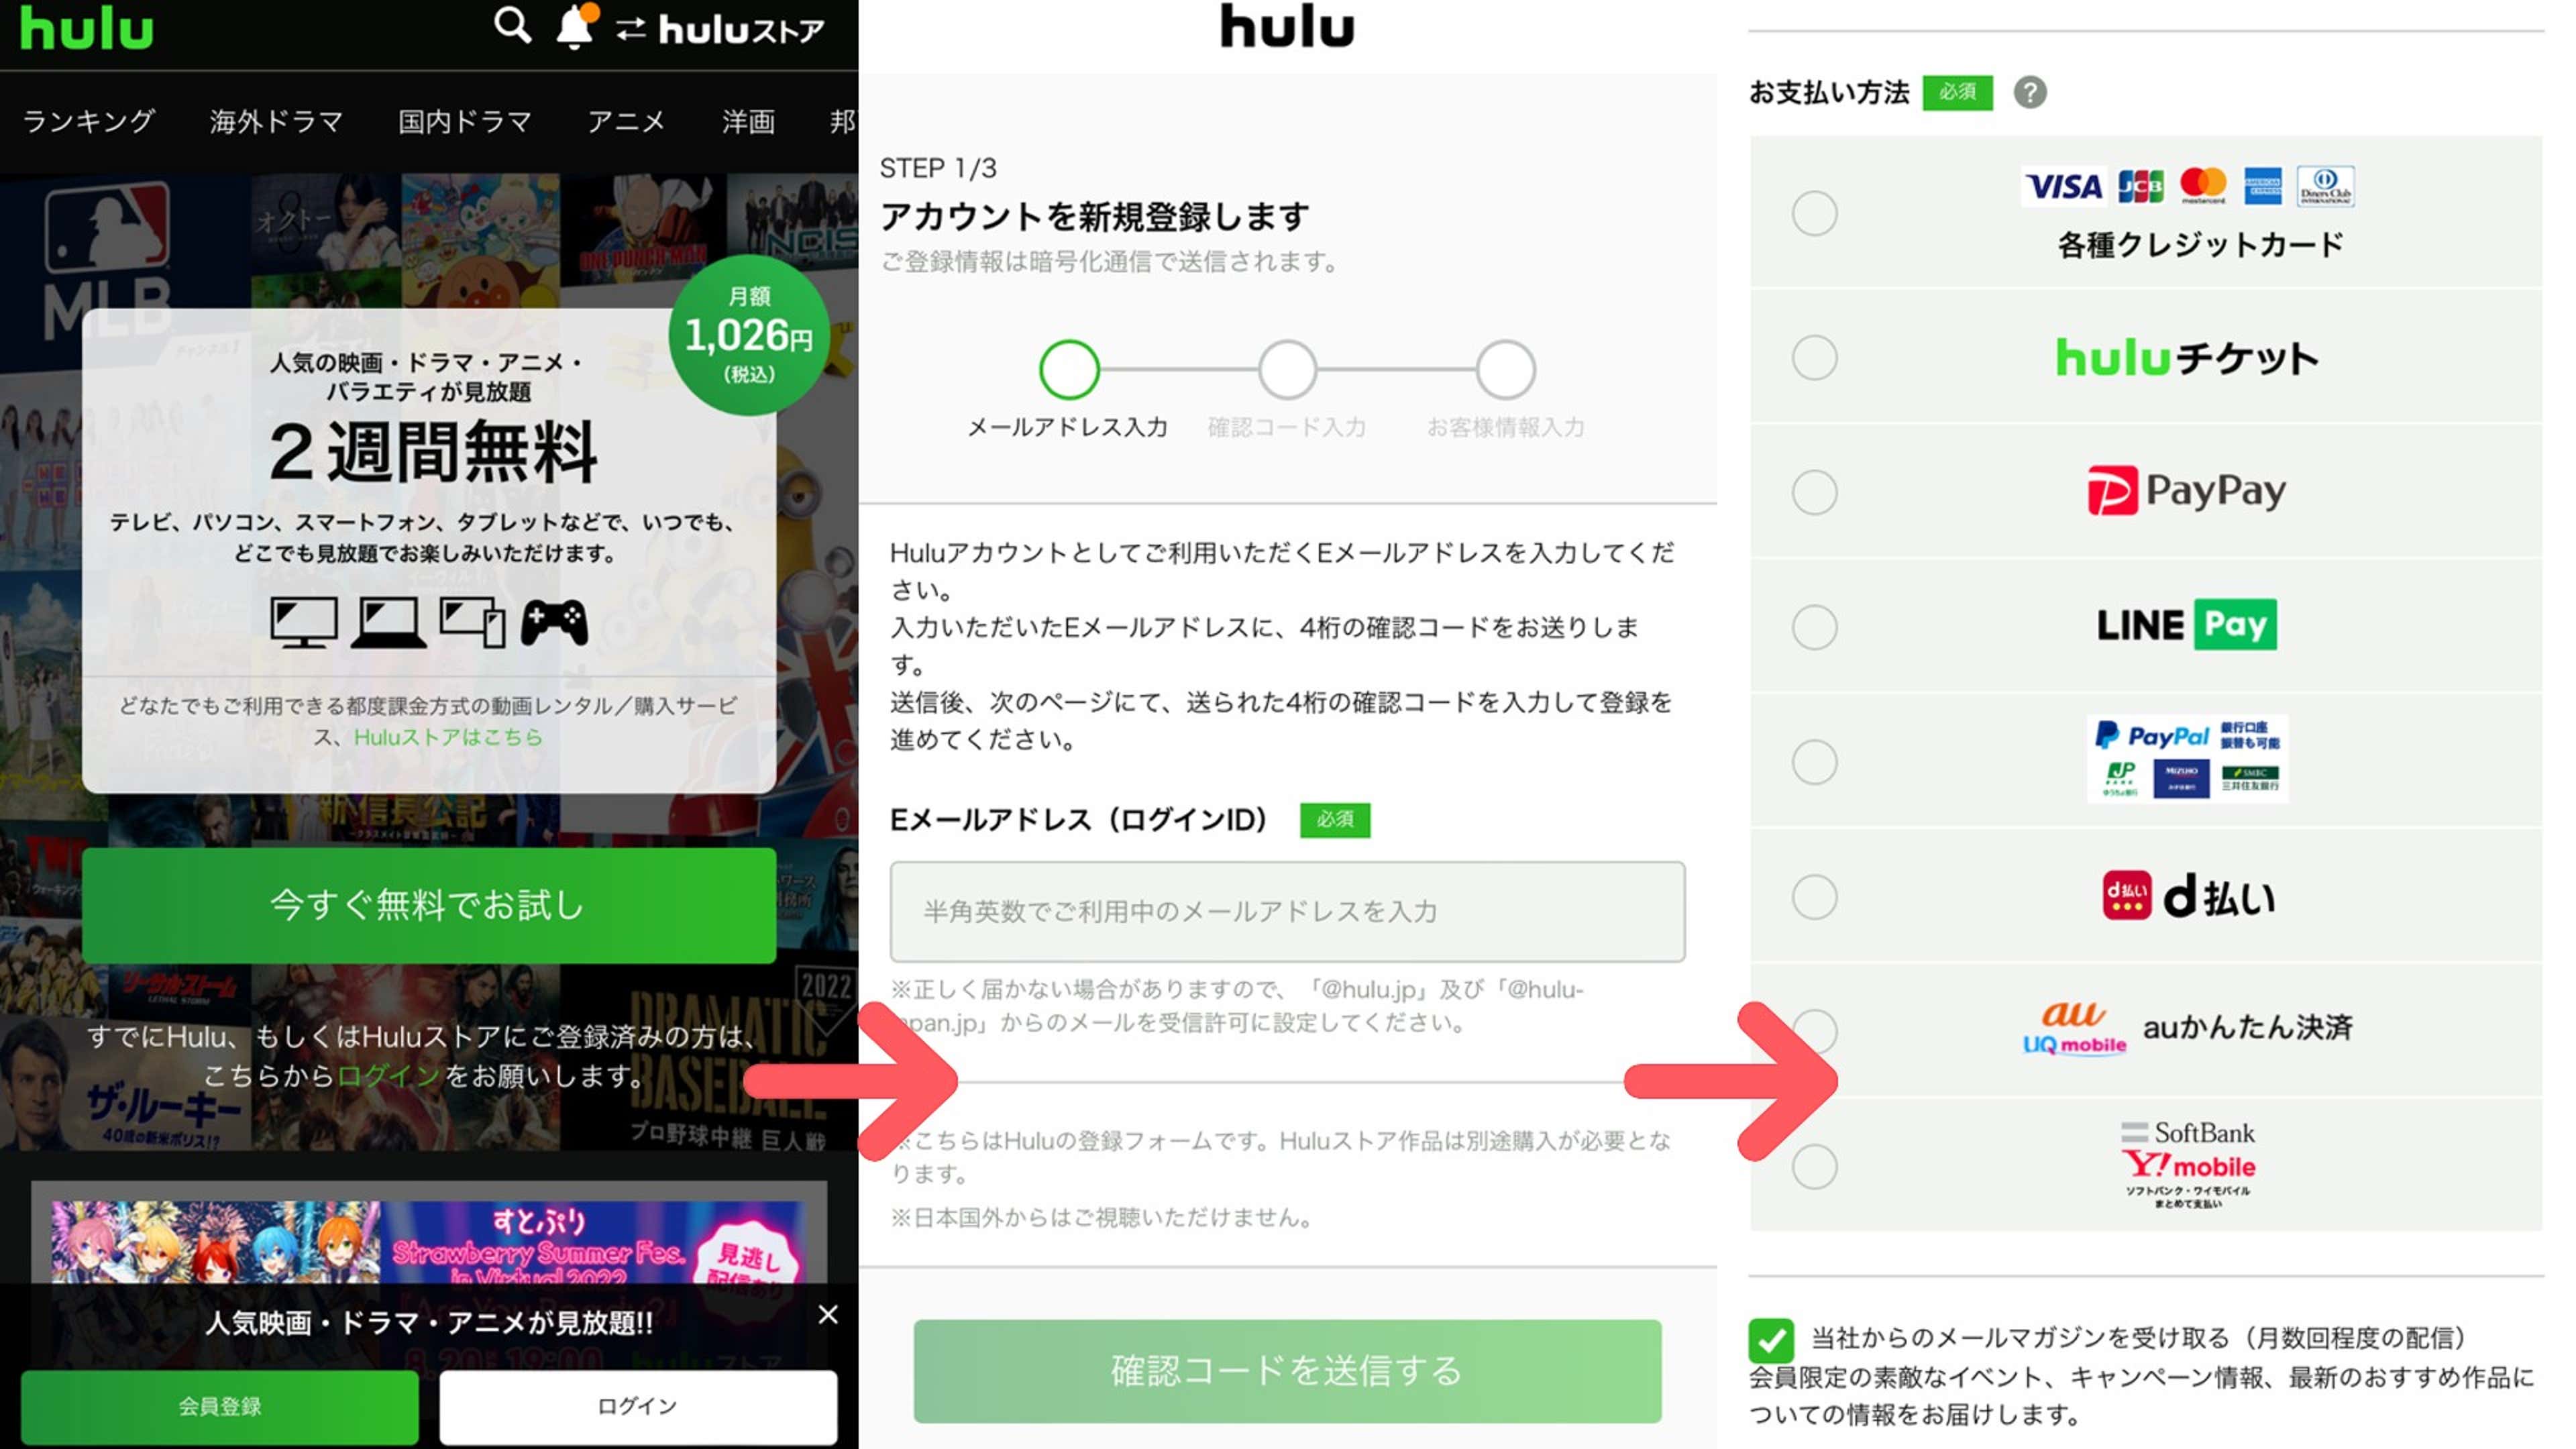 hulu join how to 01